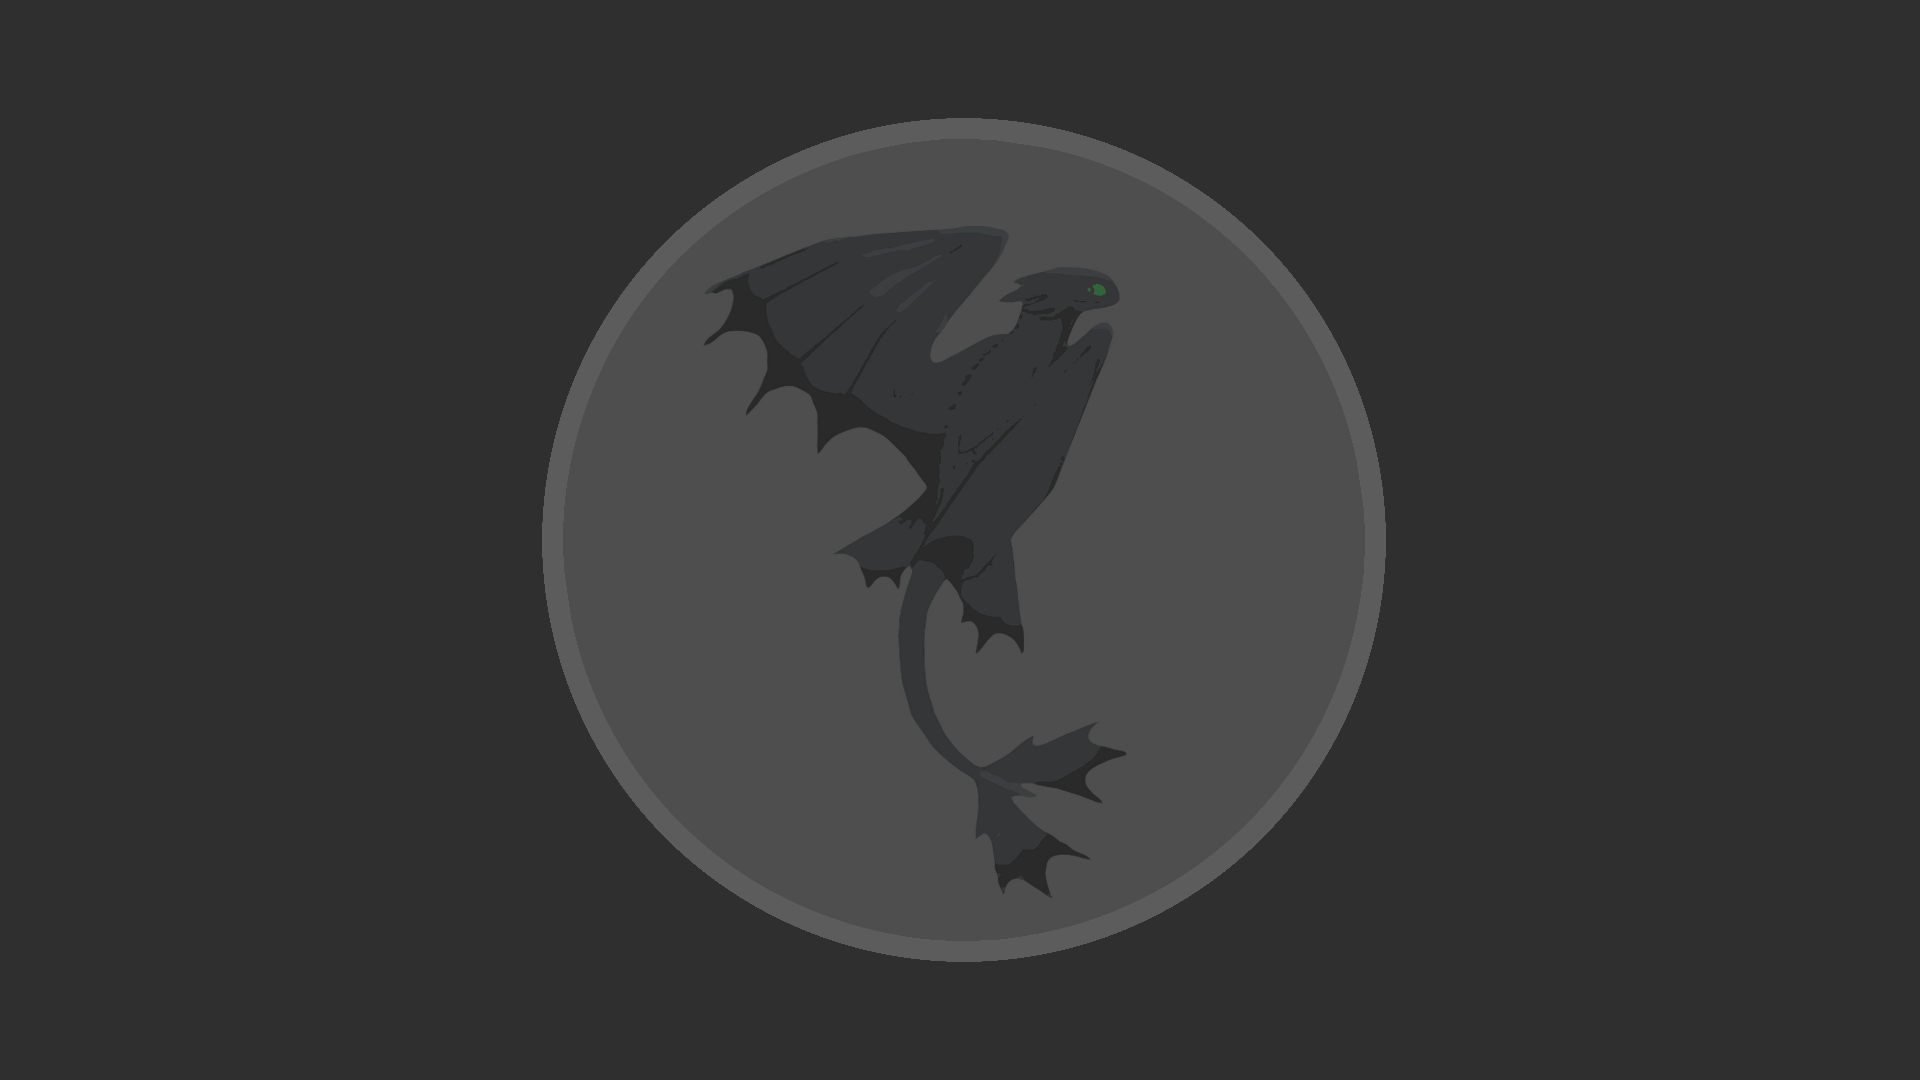 Toothless PC Wallpaper By WallpaperGallery